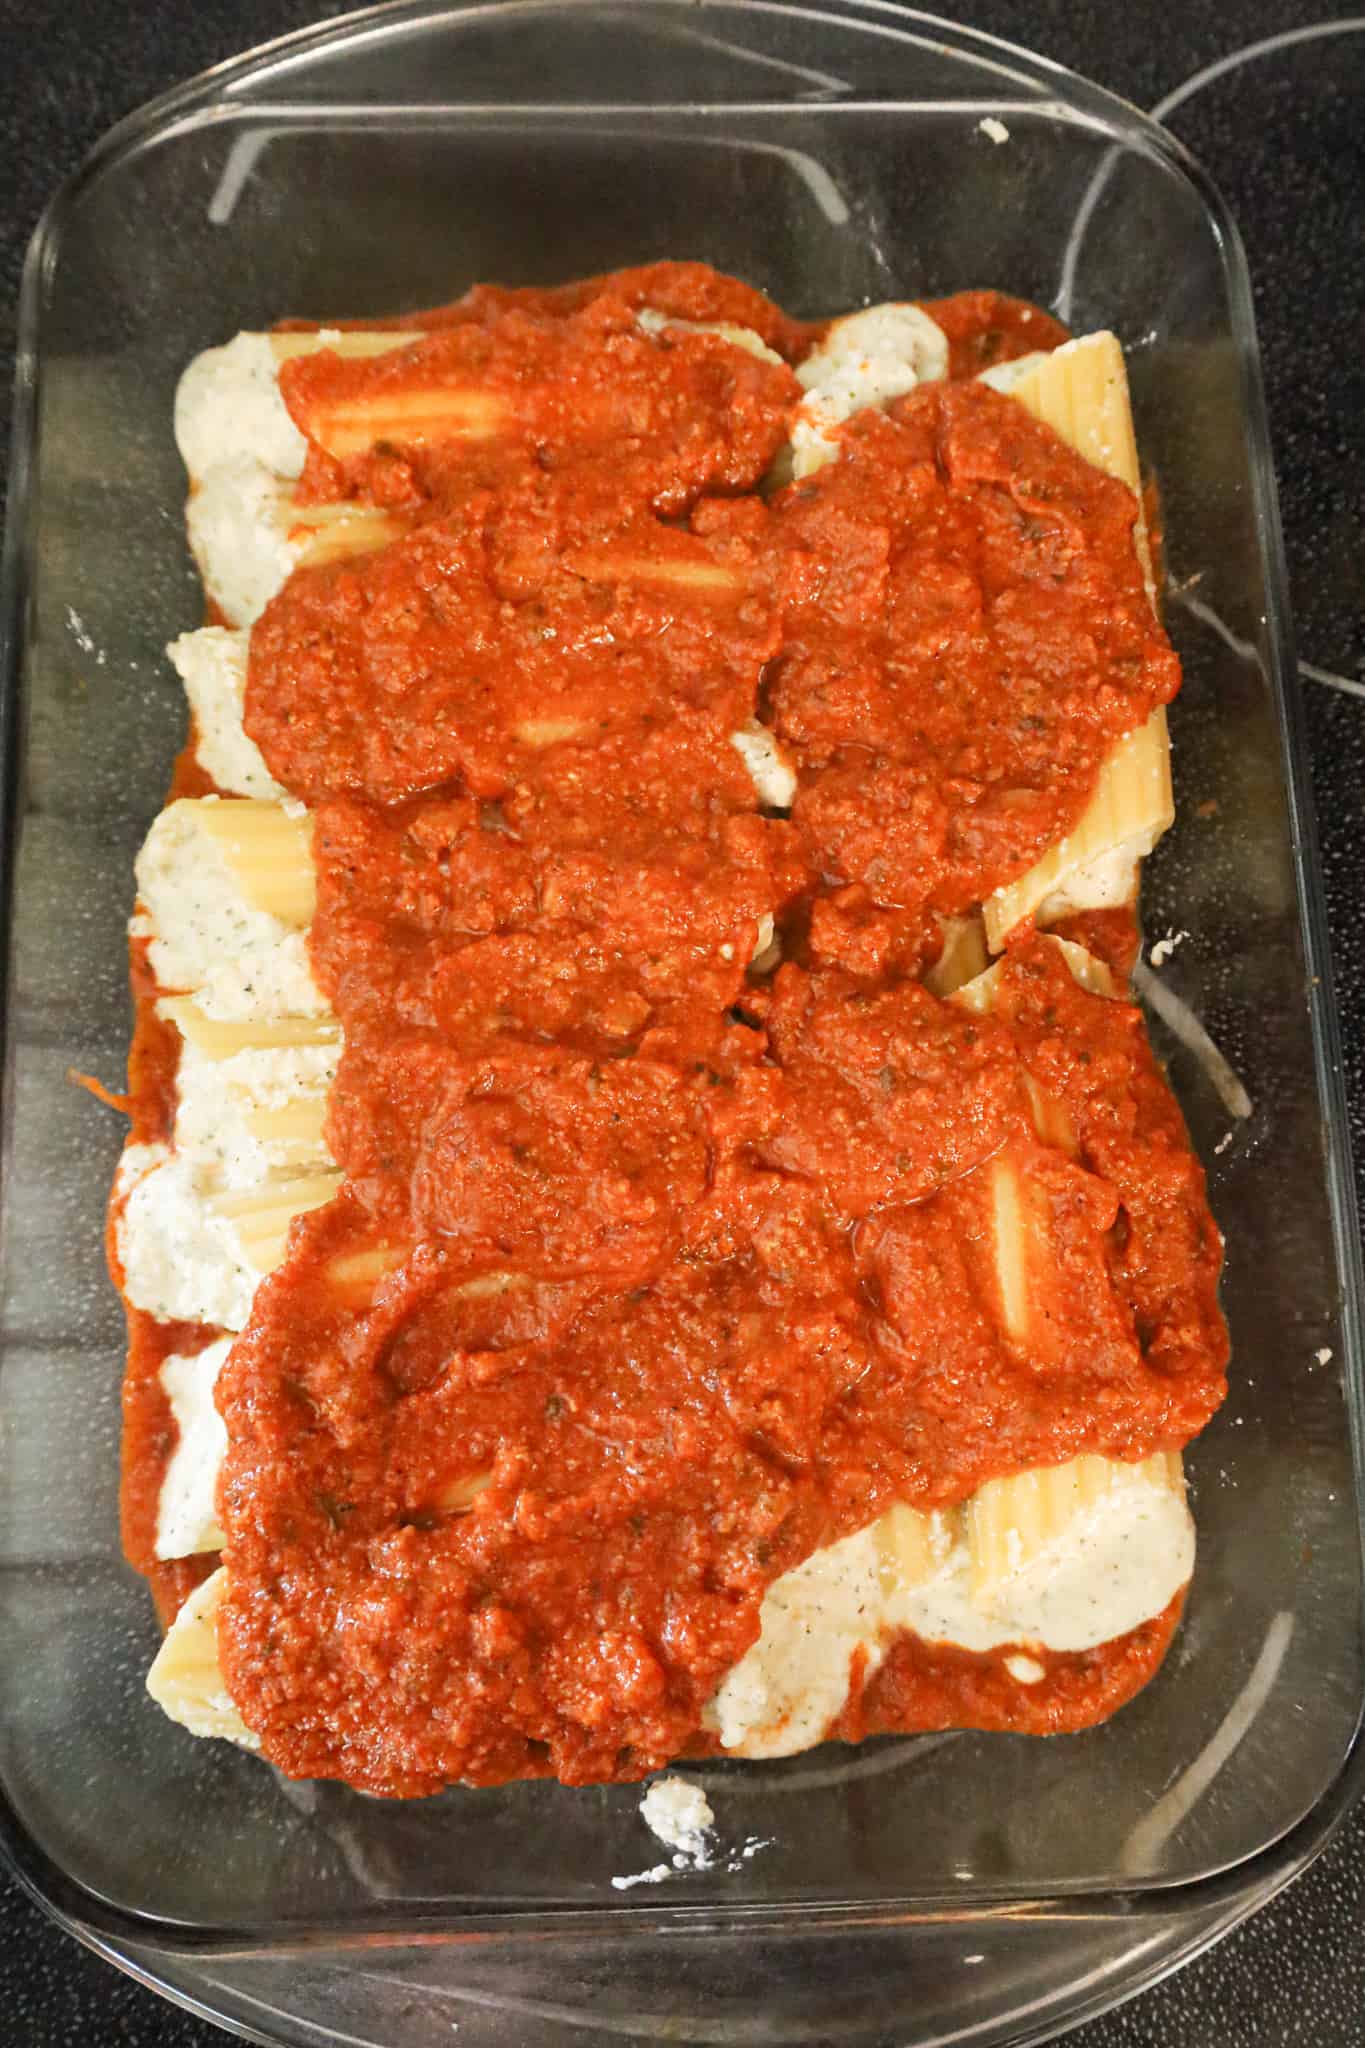 bolognese sauce on top of ricotta stuffed manicotta in a baking dish